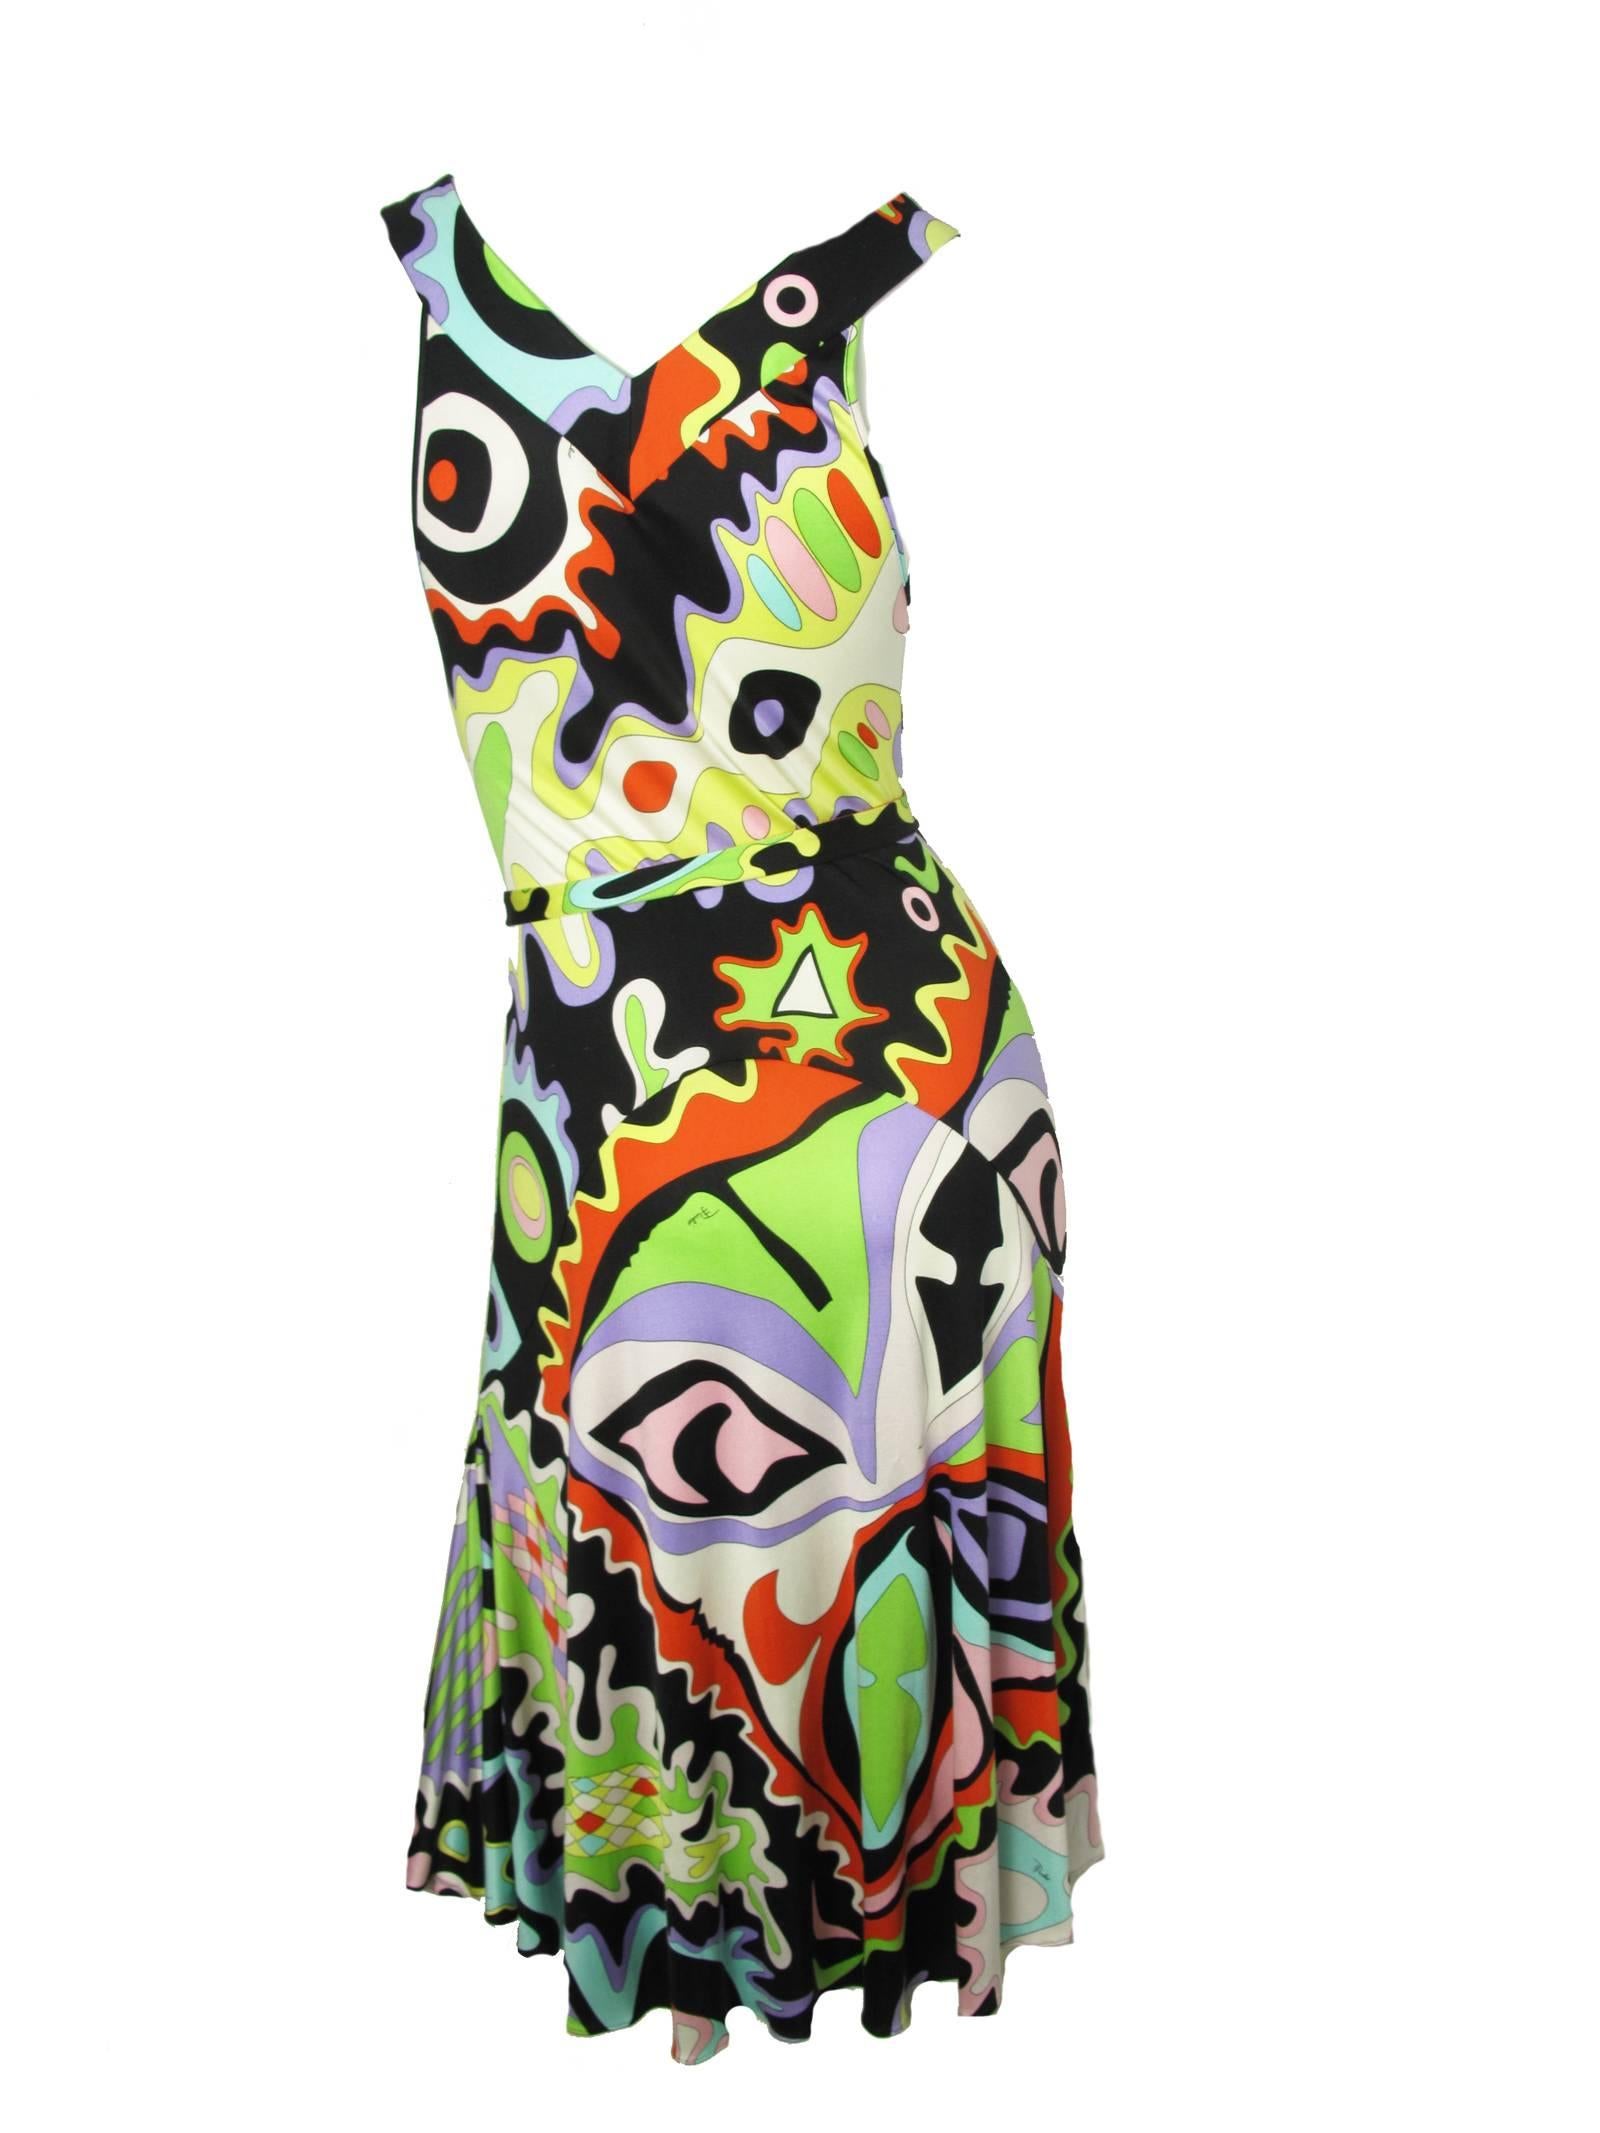 Pucci silk printed dress with belt.  Condition: Good, some pulls and small spot. Size 8

We accept returns for refund, please see our terms.  We offer free ground shipping within the US.  Please let us know if you have any questions.
